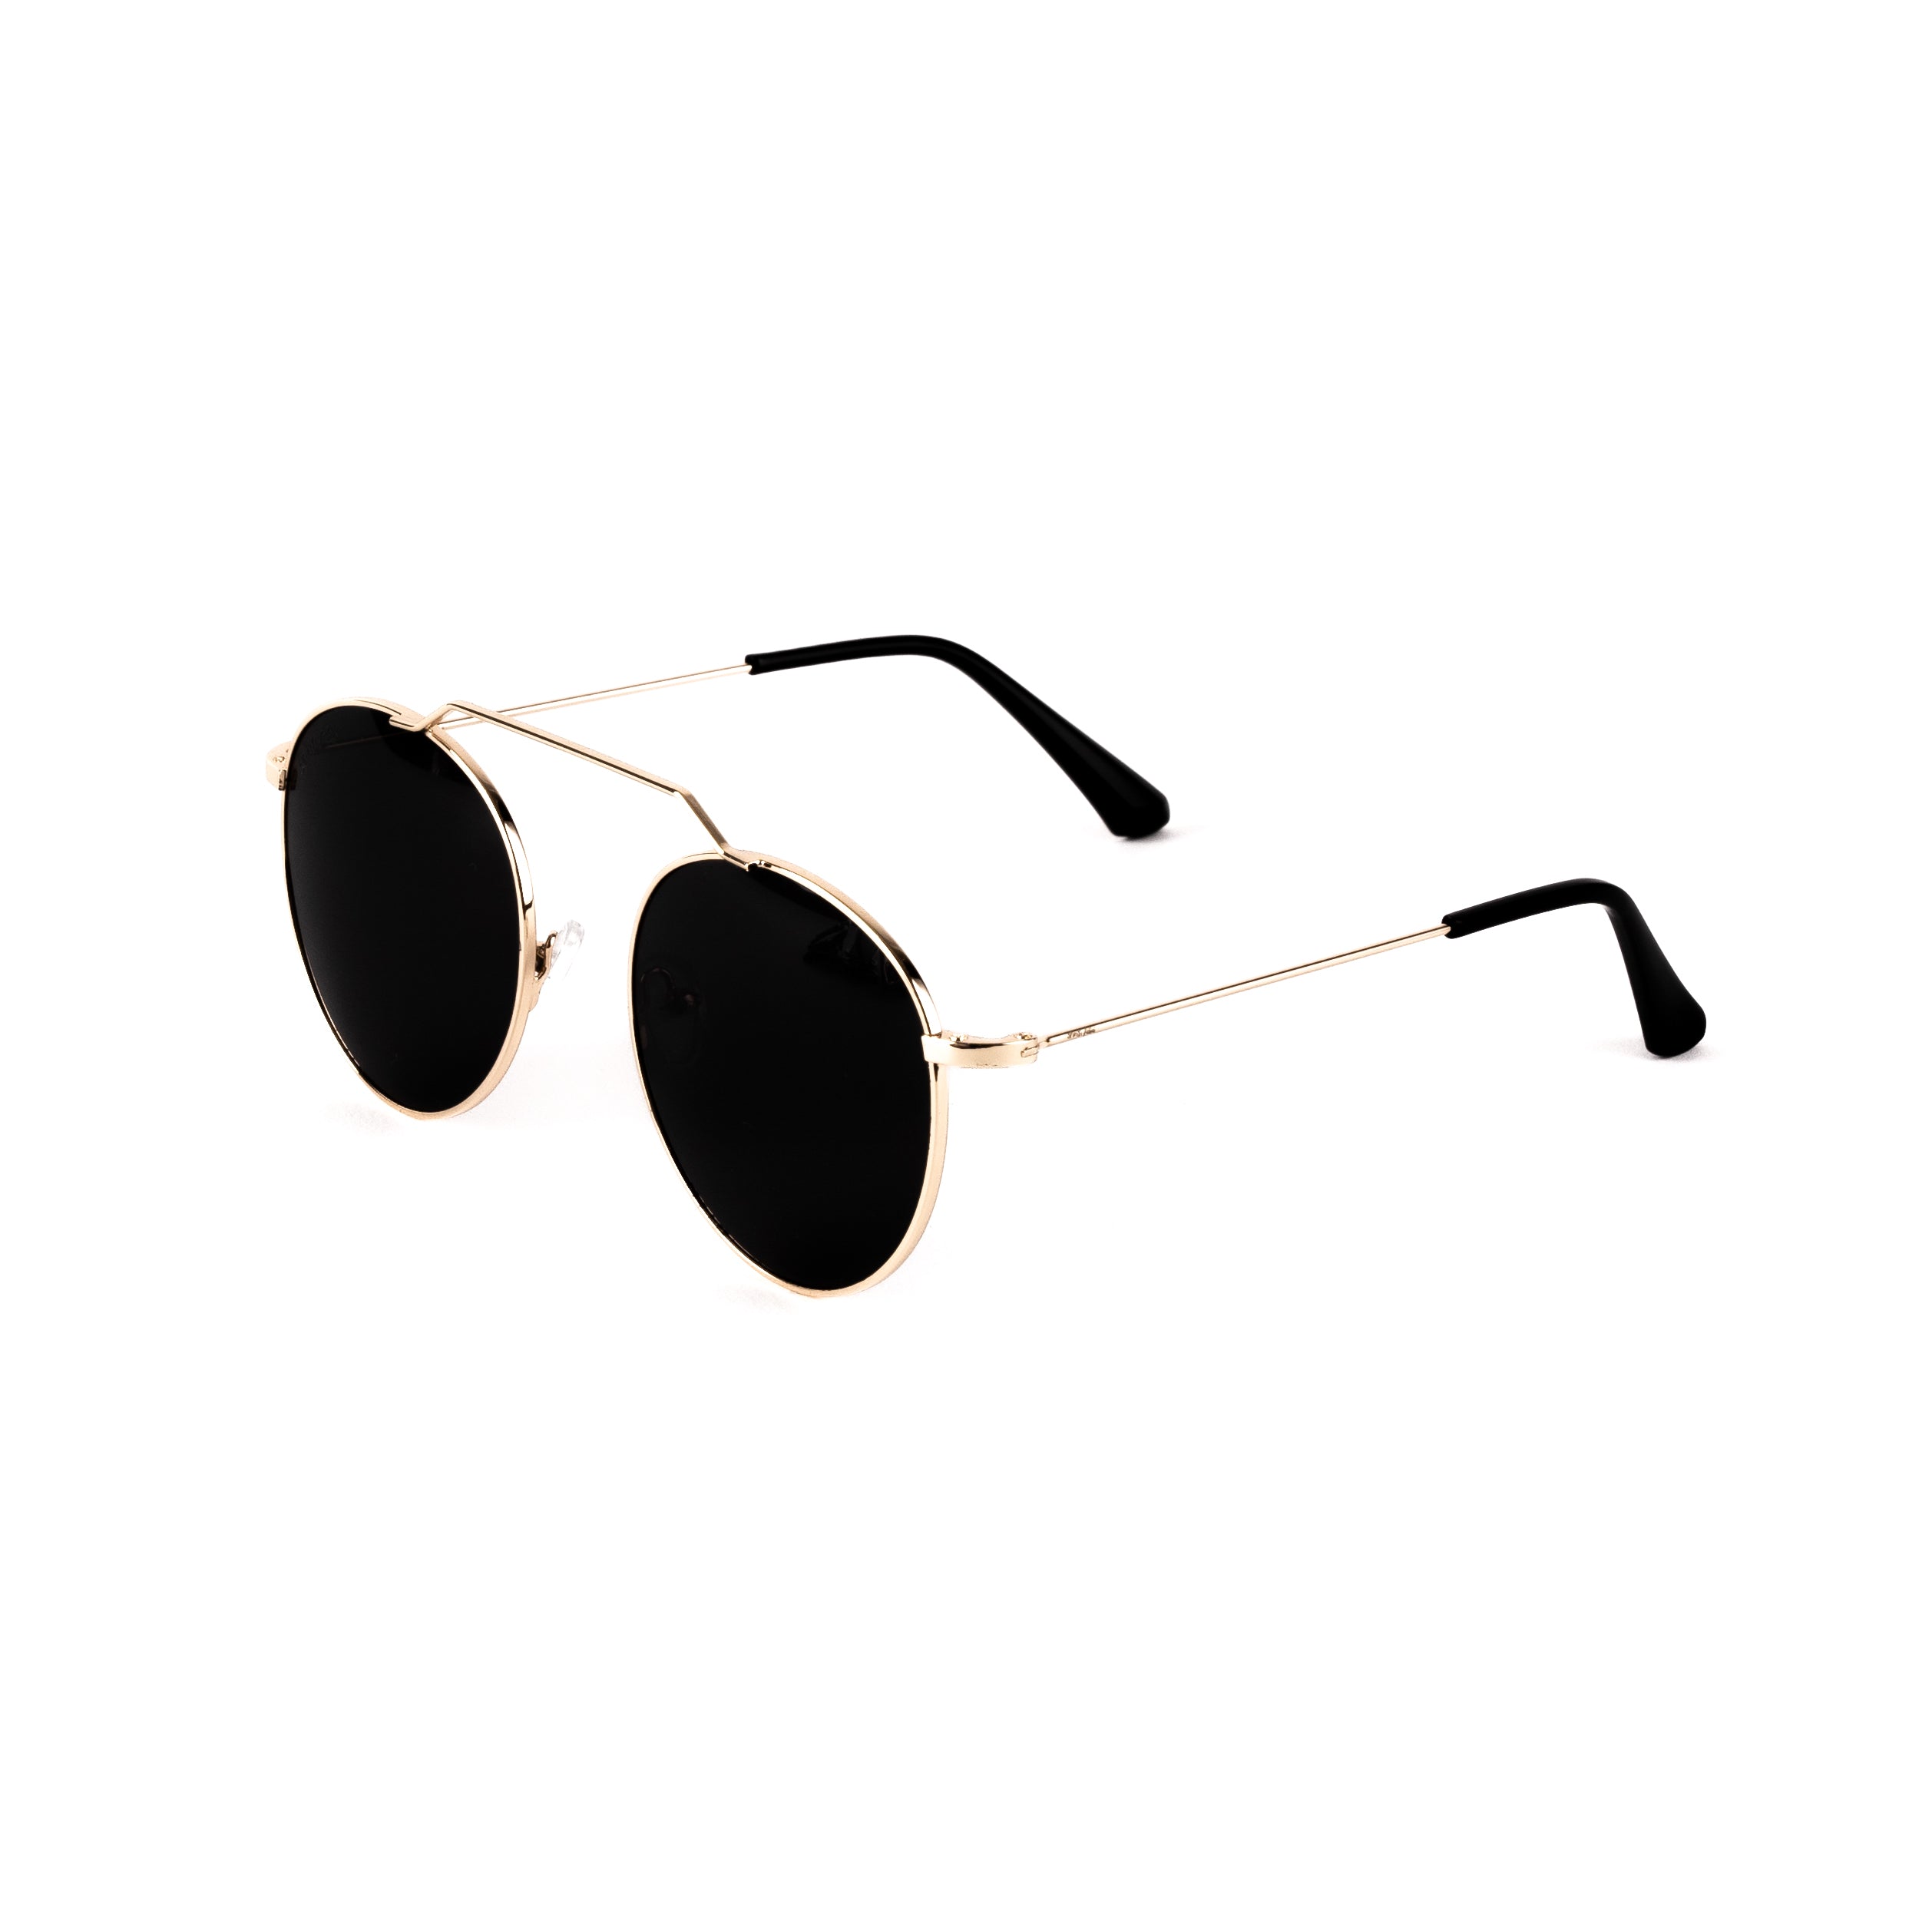 Buy CONNECT sunglasses from Spiriti Felici available online at VEND. Explore more product category collections now